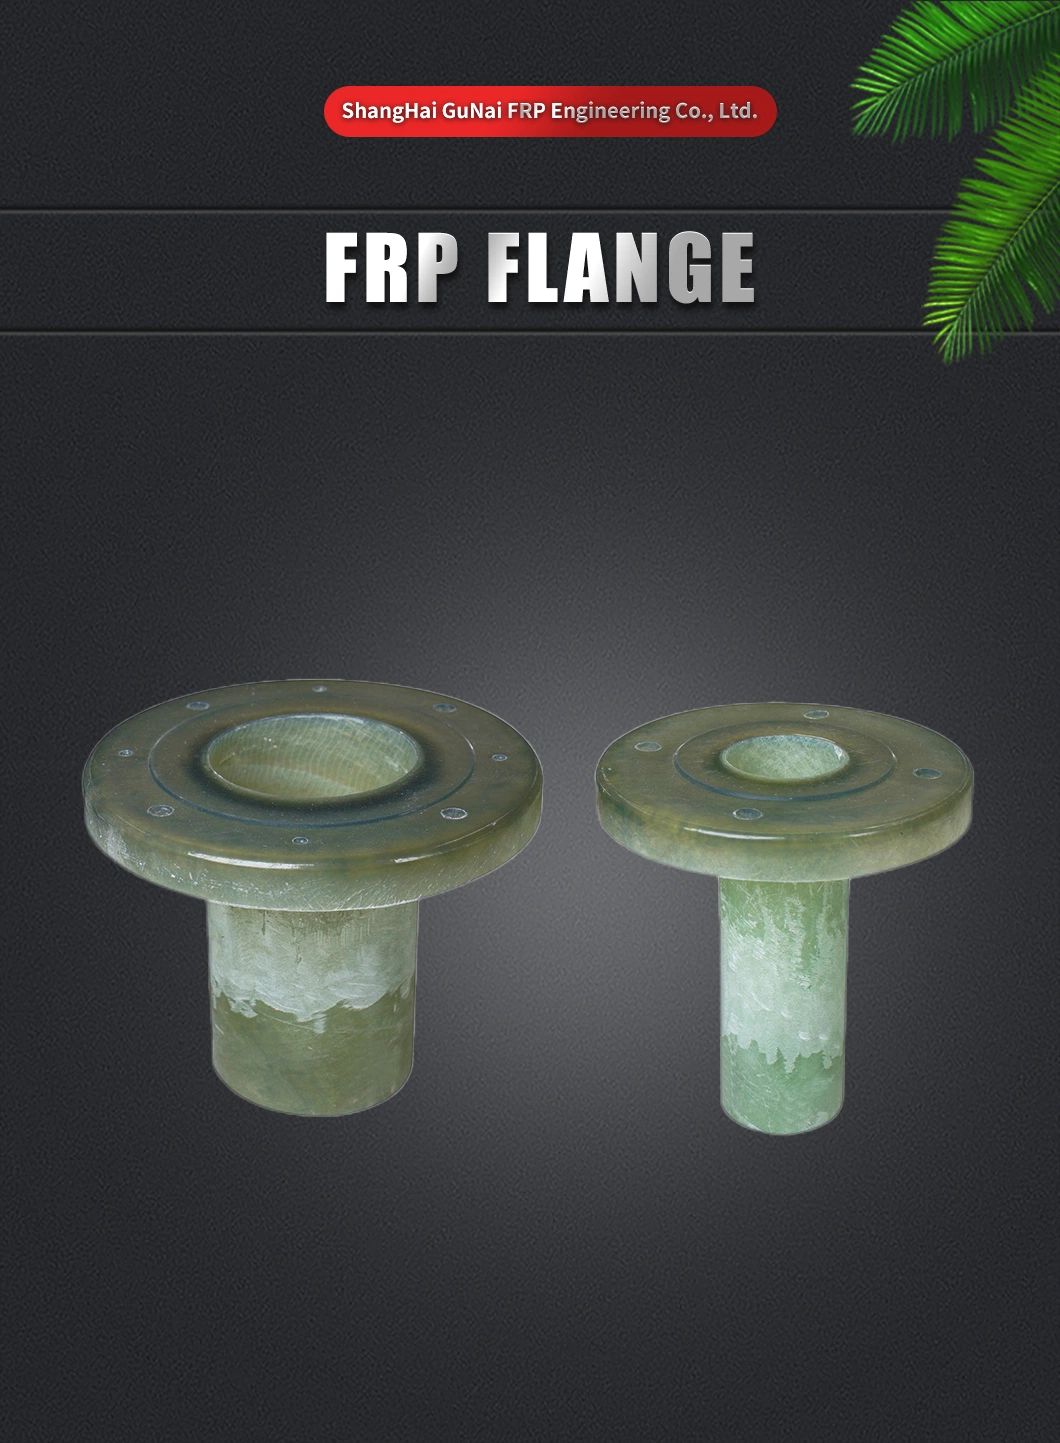 High Performance FRP Flange for Critical Pipe Connections